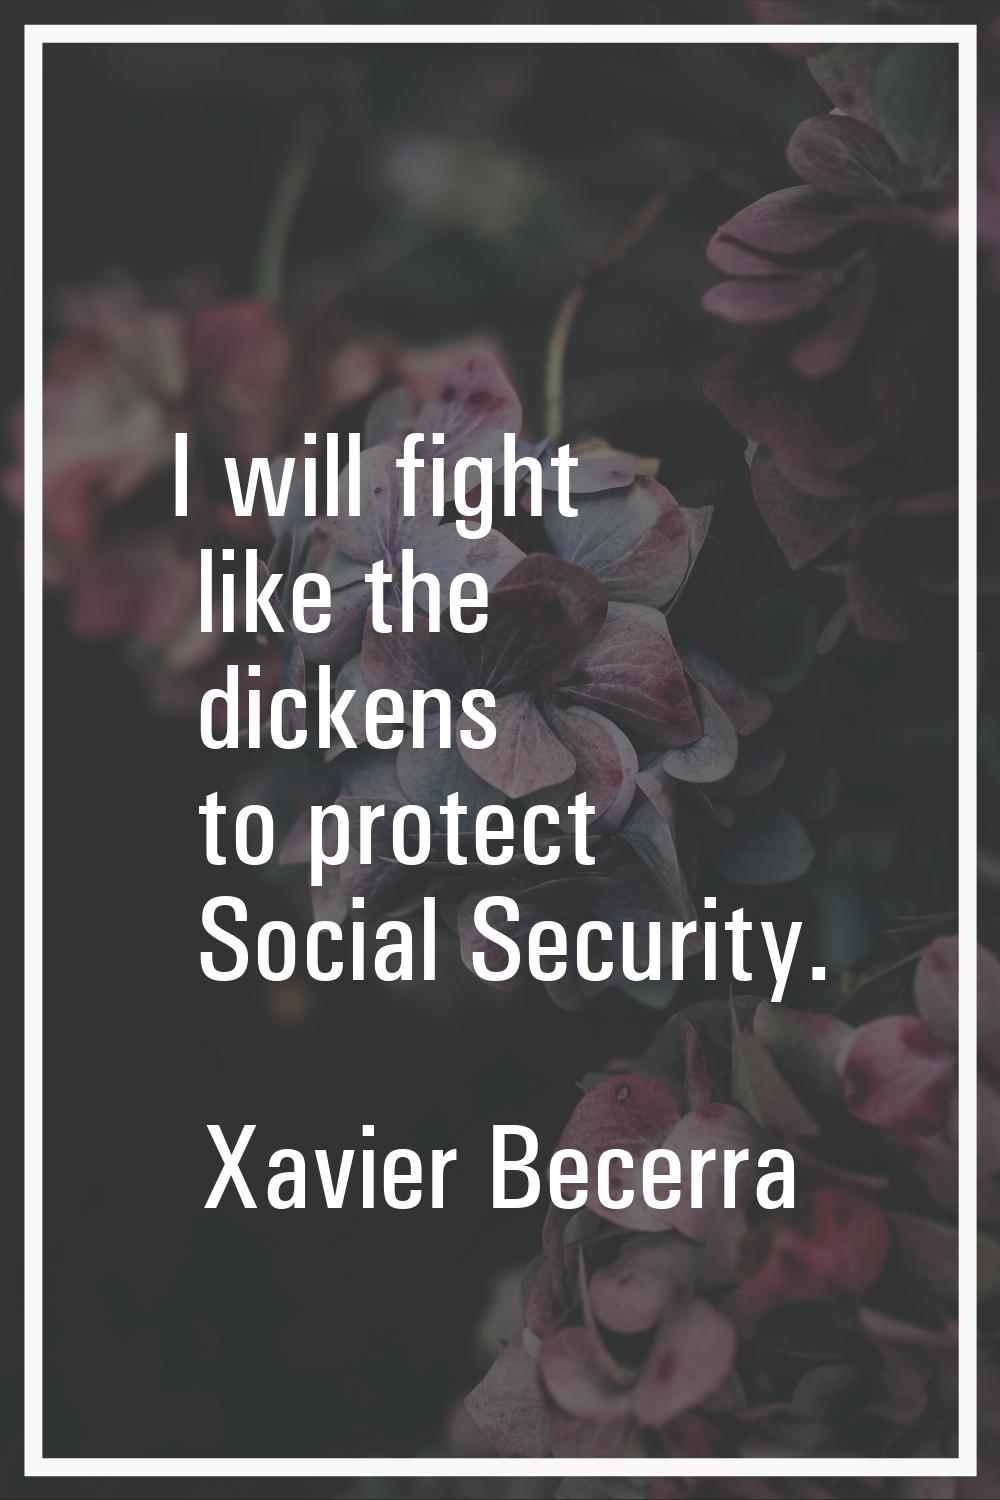 I will fight like the dickens to protect Social Security.